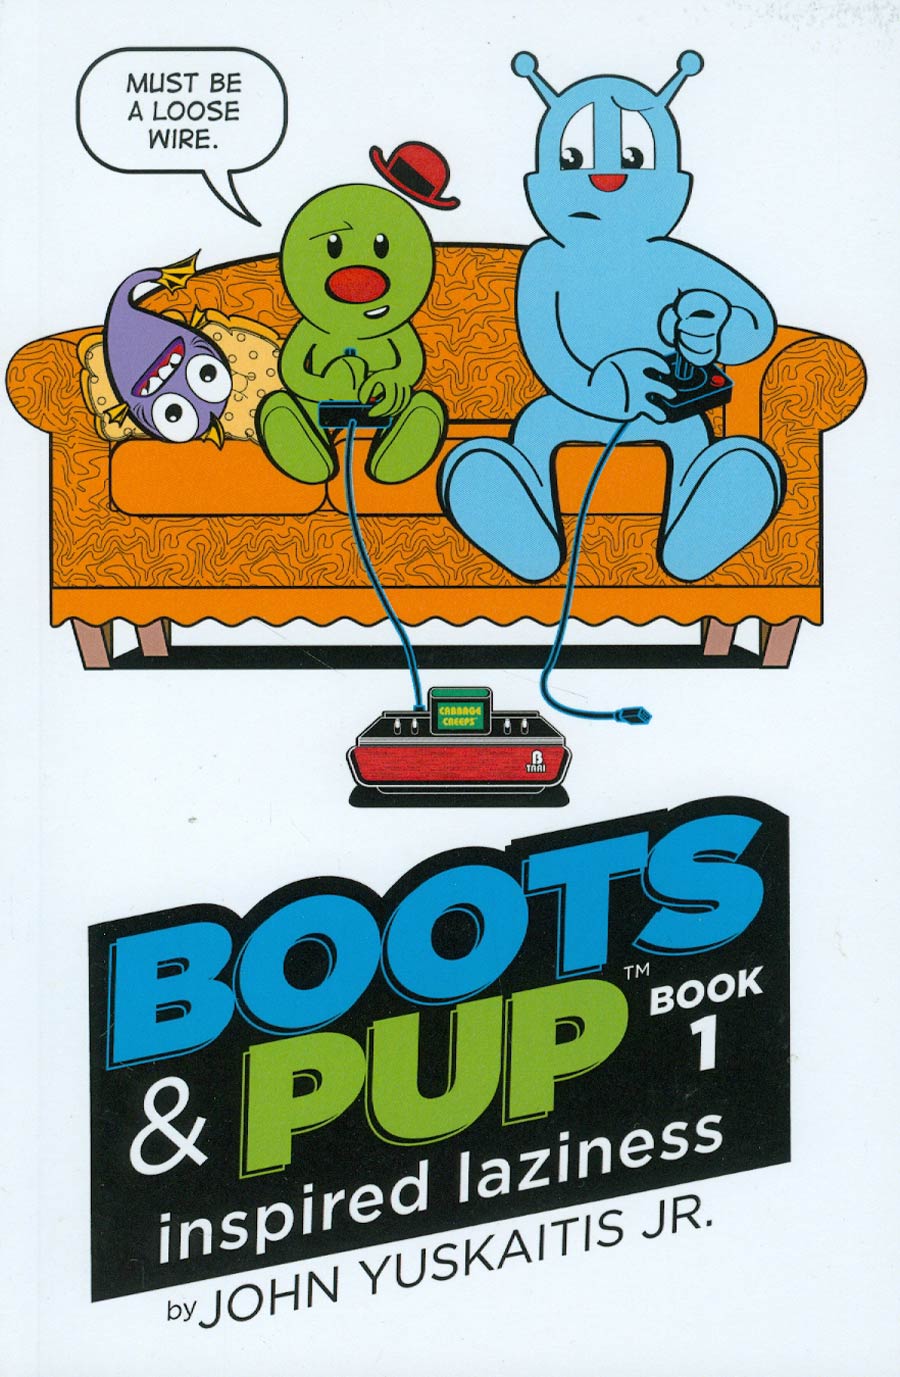 Boots & Pup Vol 1 Inspired Laziness TP